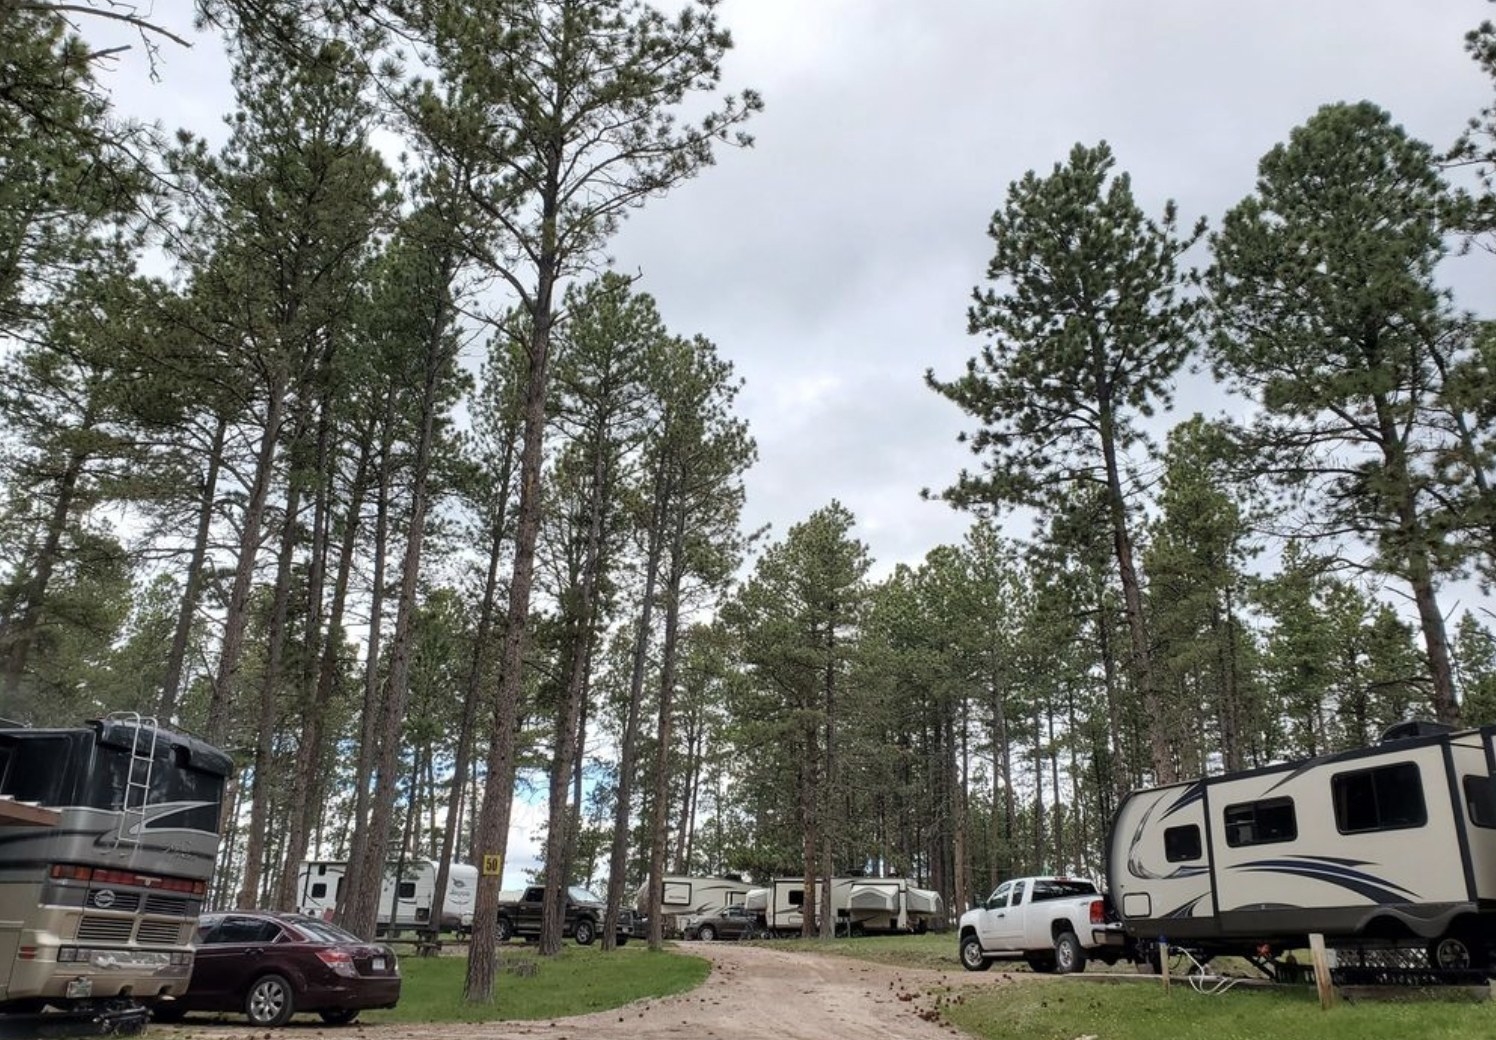 RVs parked under the trees